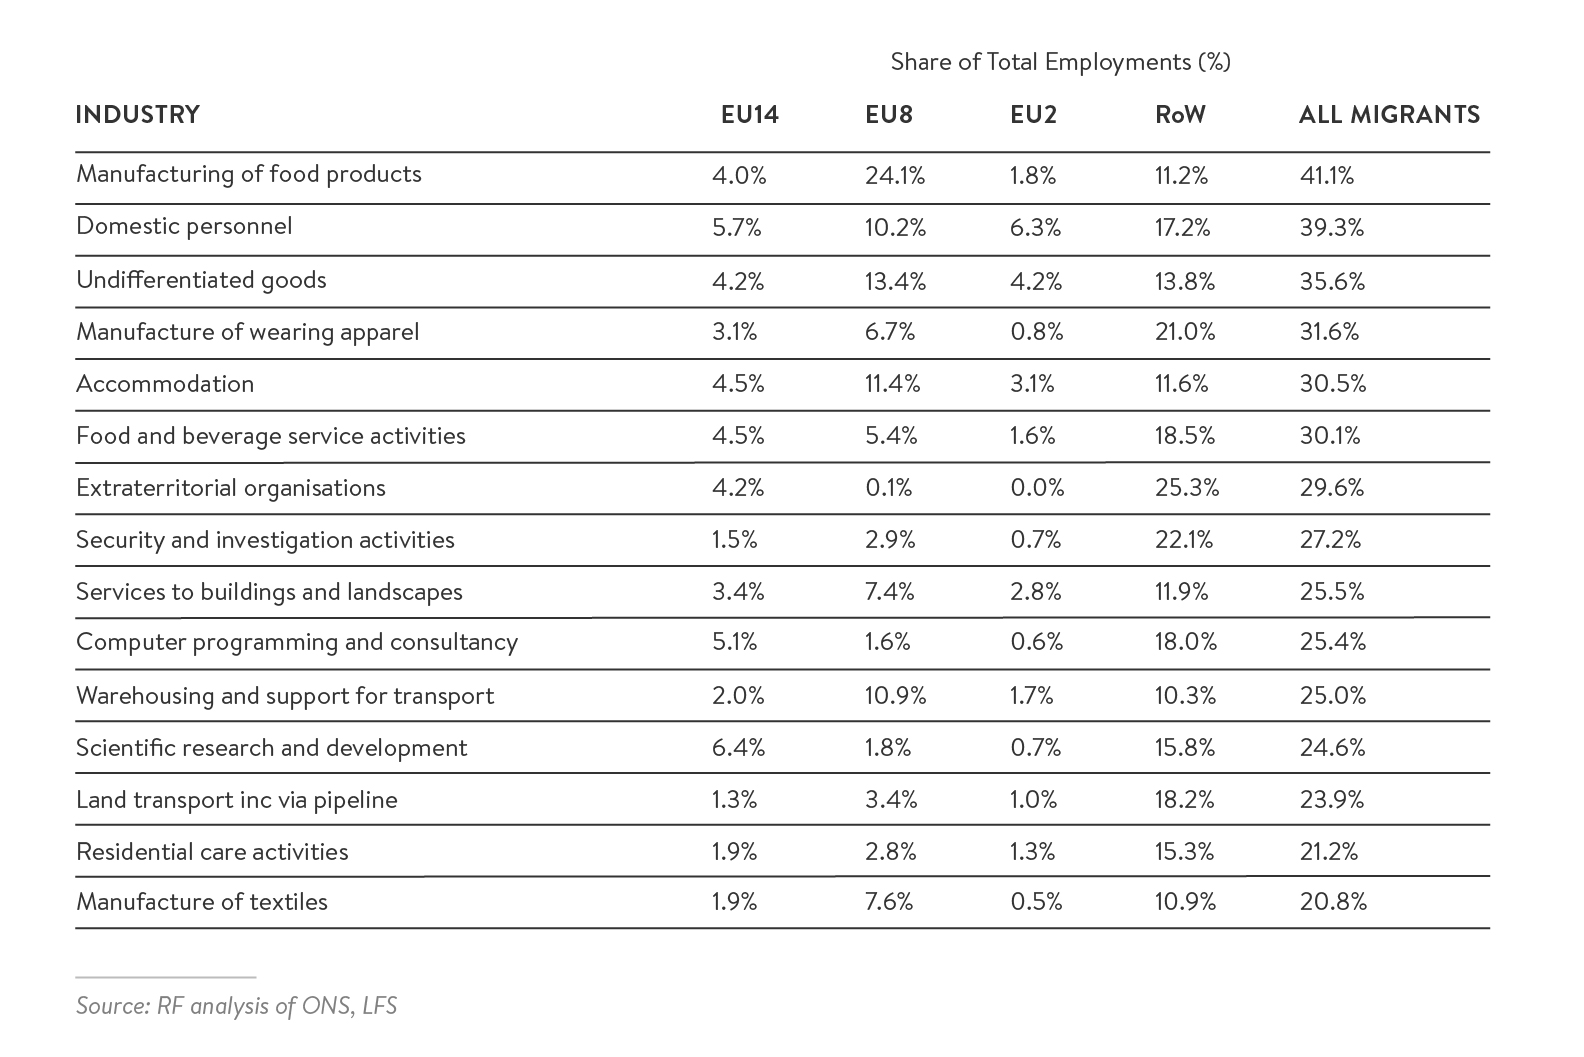 Table 13: Reliance of Certain Industries on Migrant Labour, 2014–2016